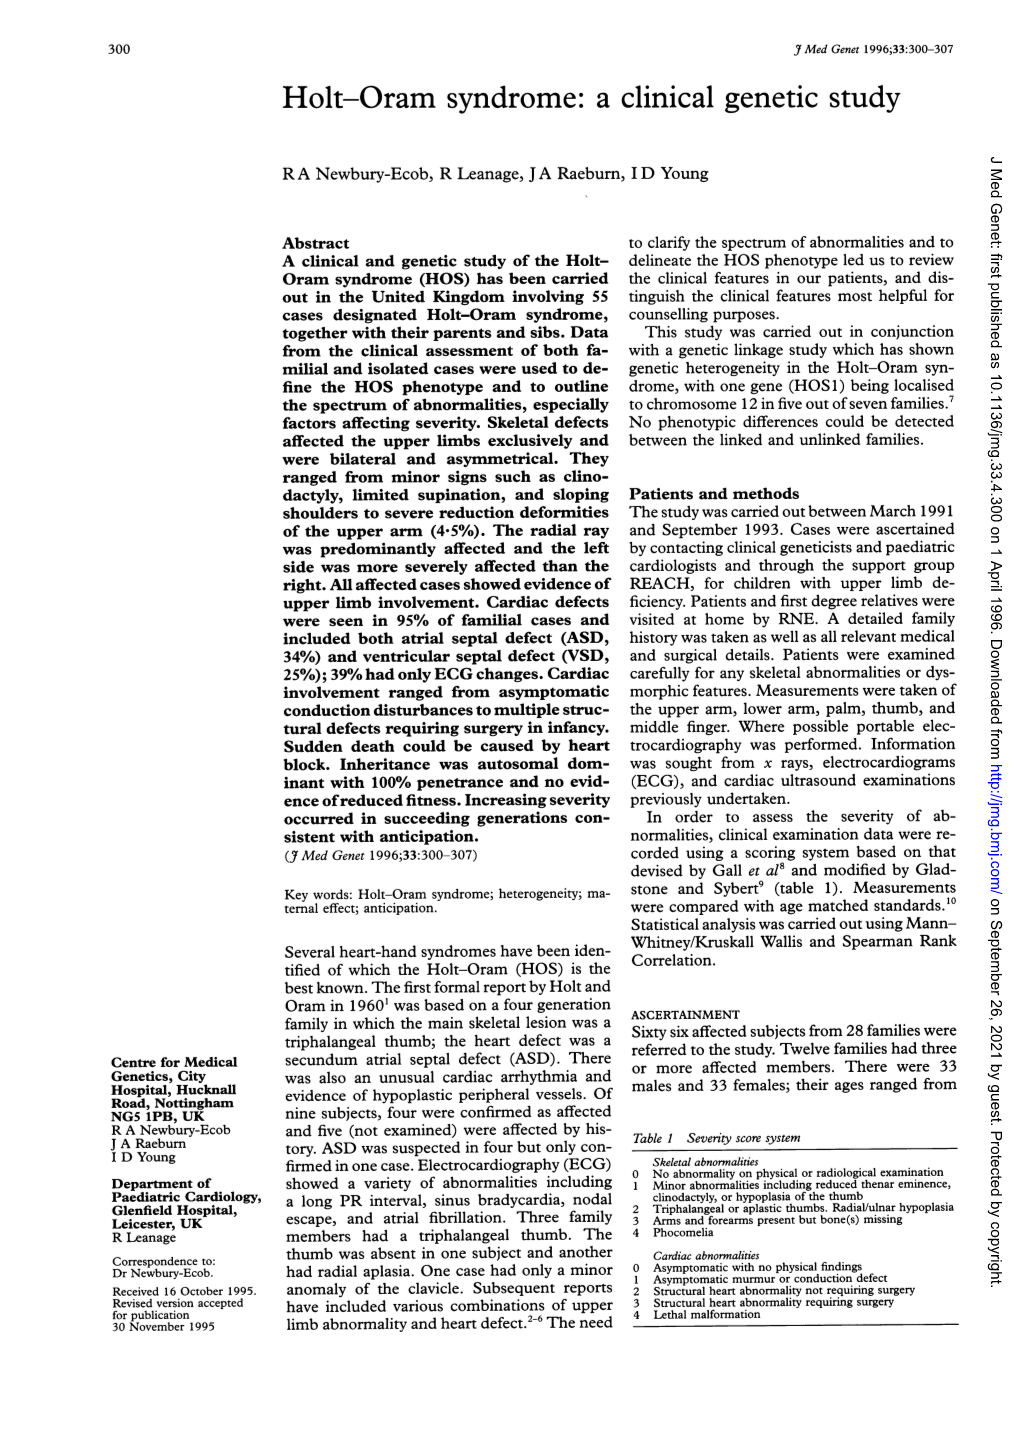 Holt-Oram Syndrome: a Clinical Genetic Study J Med Genet: First Published As 10.1136/Jmg.33.4.300 on 1 April 1996